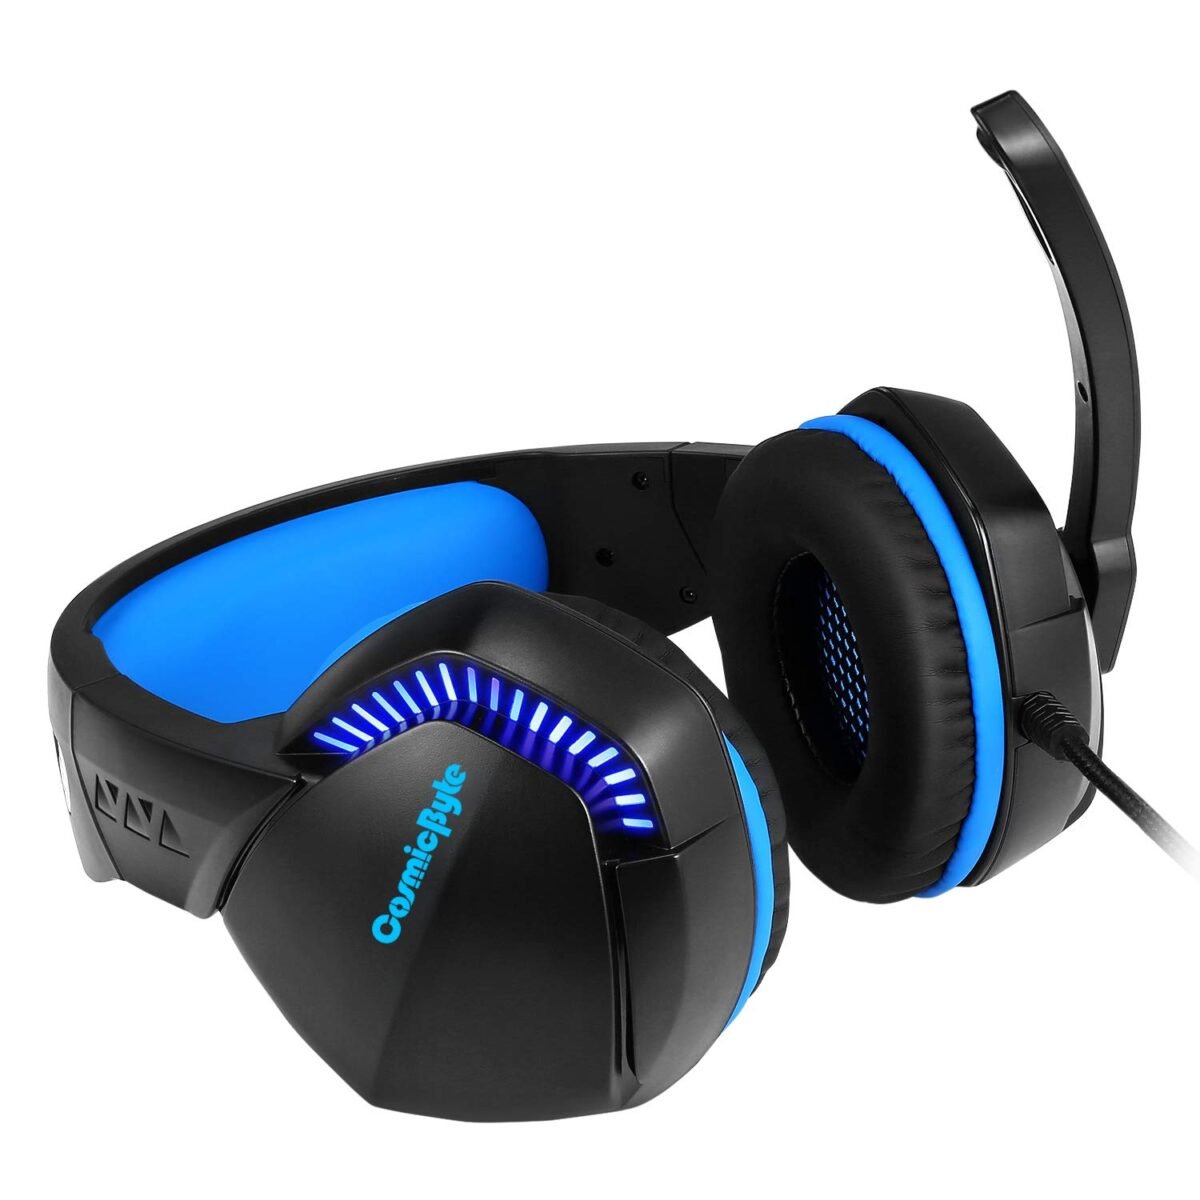 H3 Gaming Wired over ear Headphone With Mic